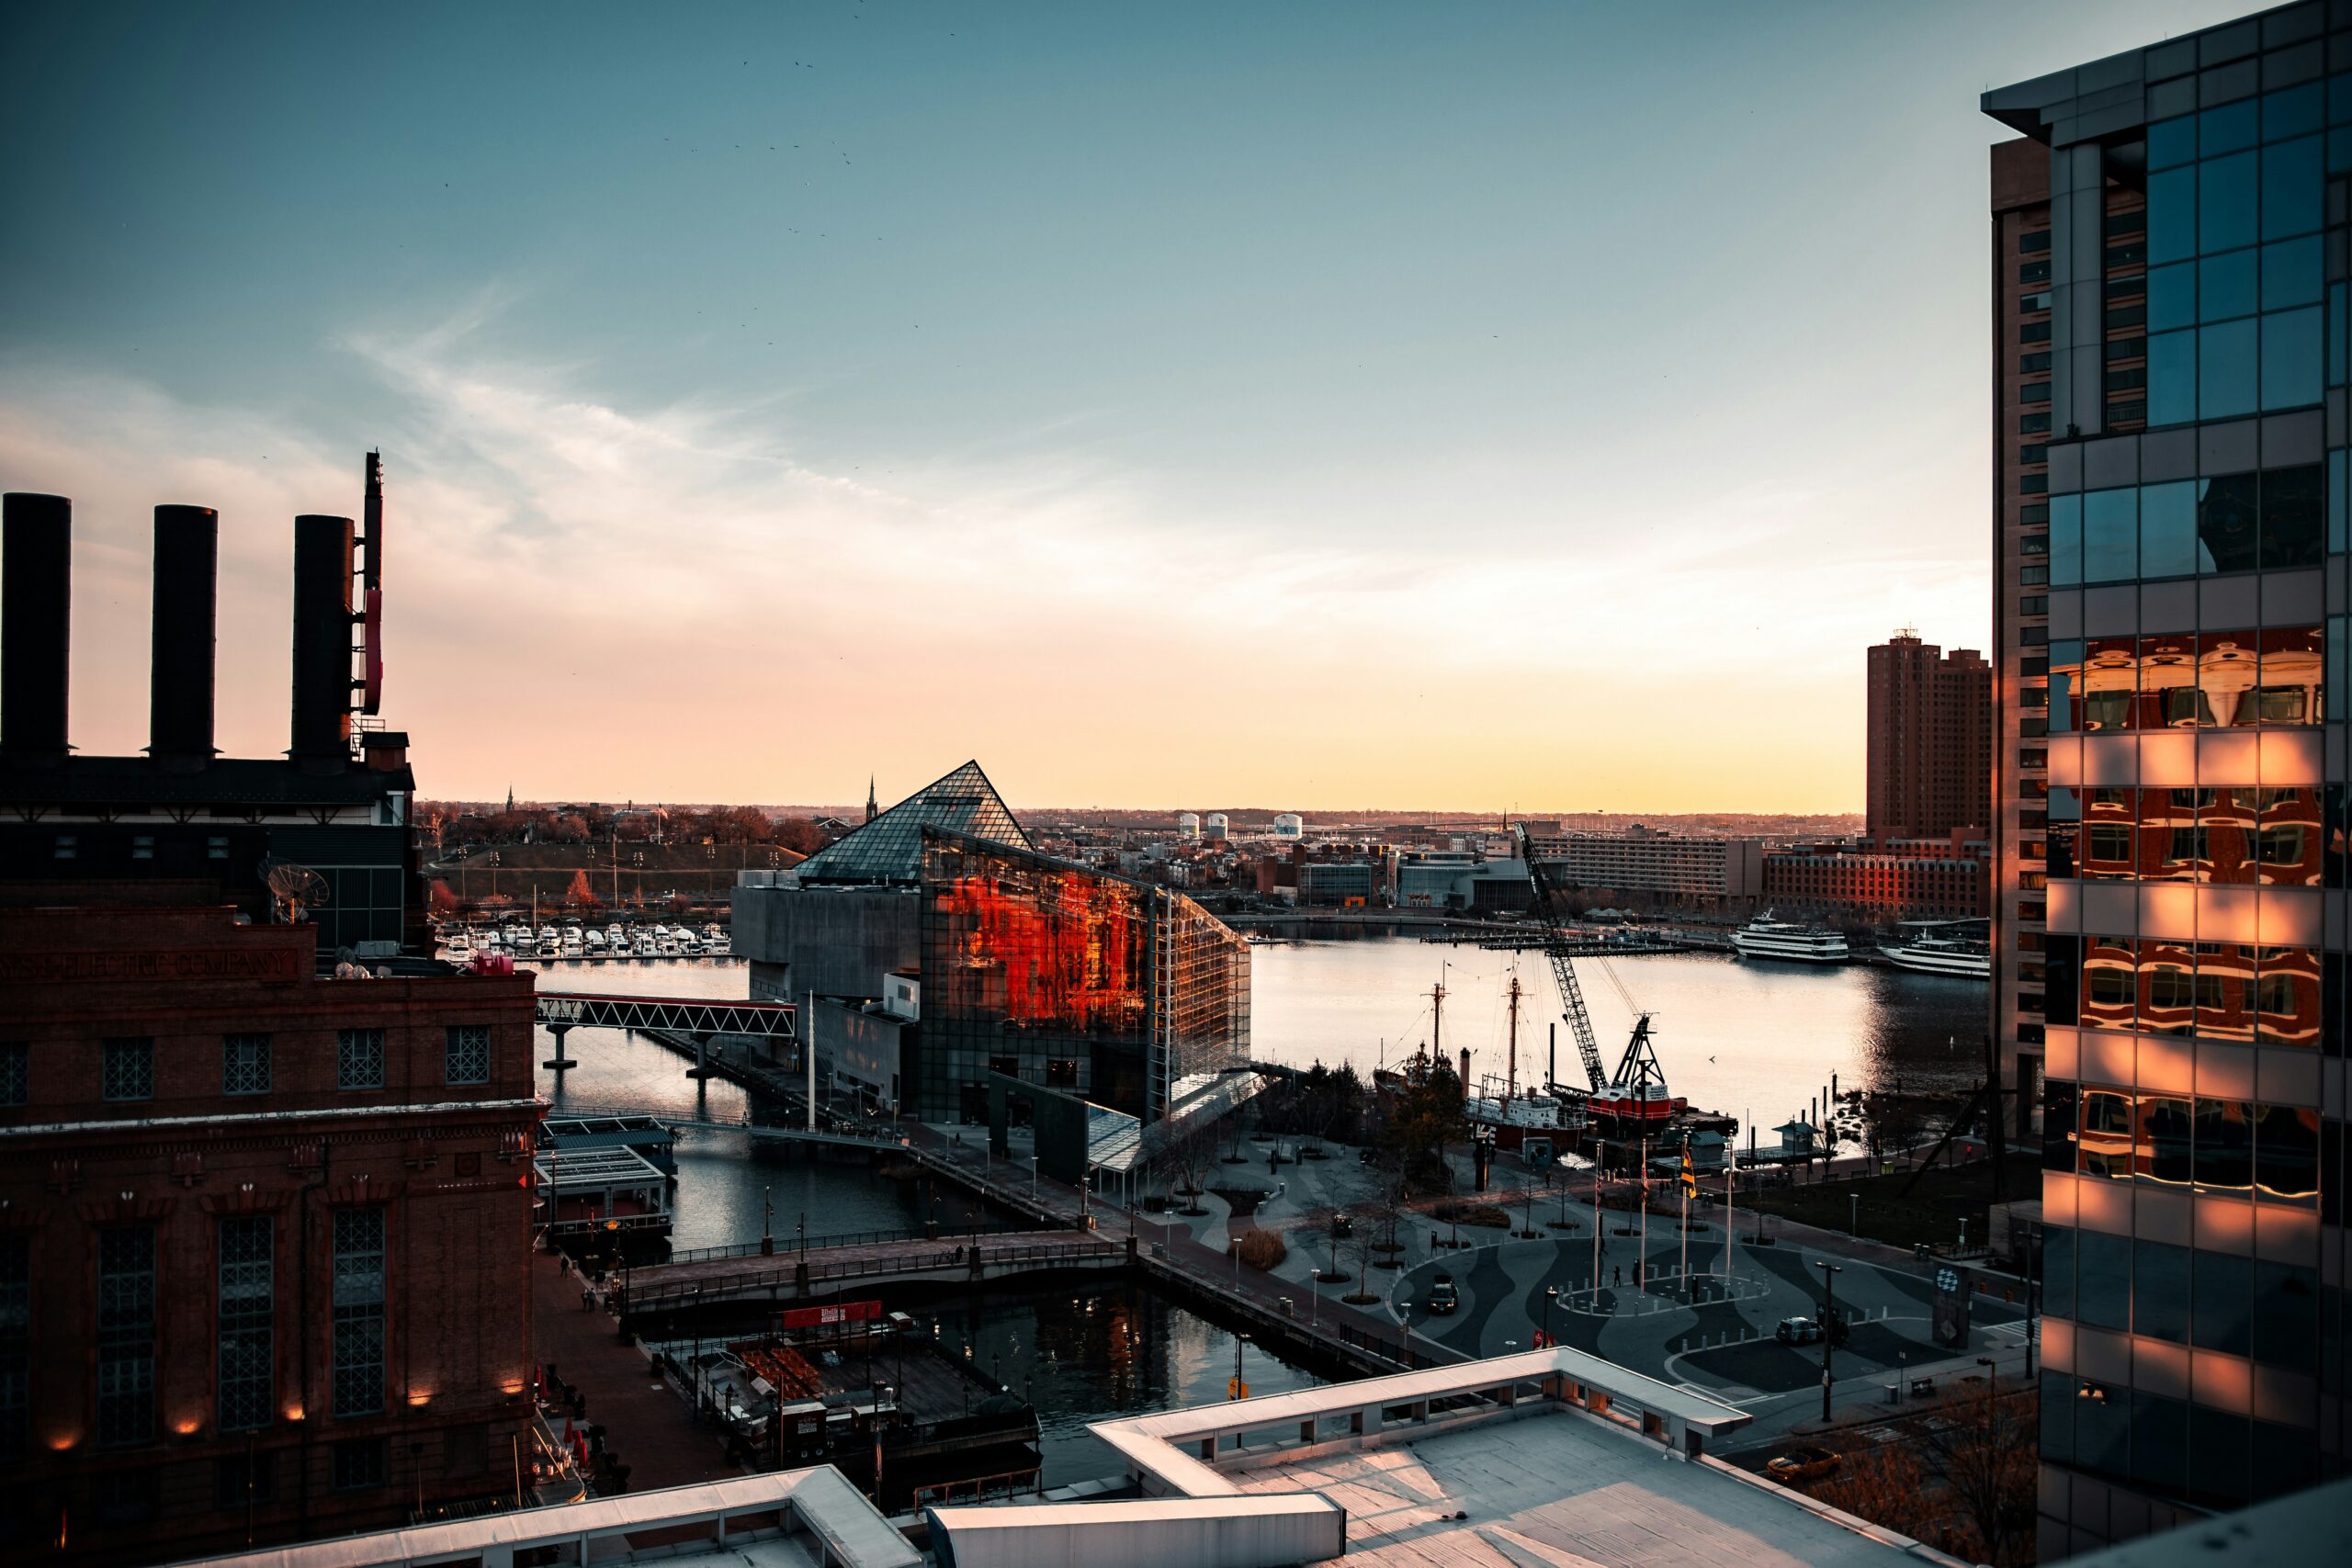 The city of Baltimore has approved houses for $1 that residents can purchase. Find out if your qualify here. Pictured: City view of Baltimore